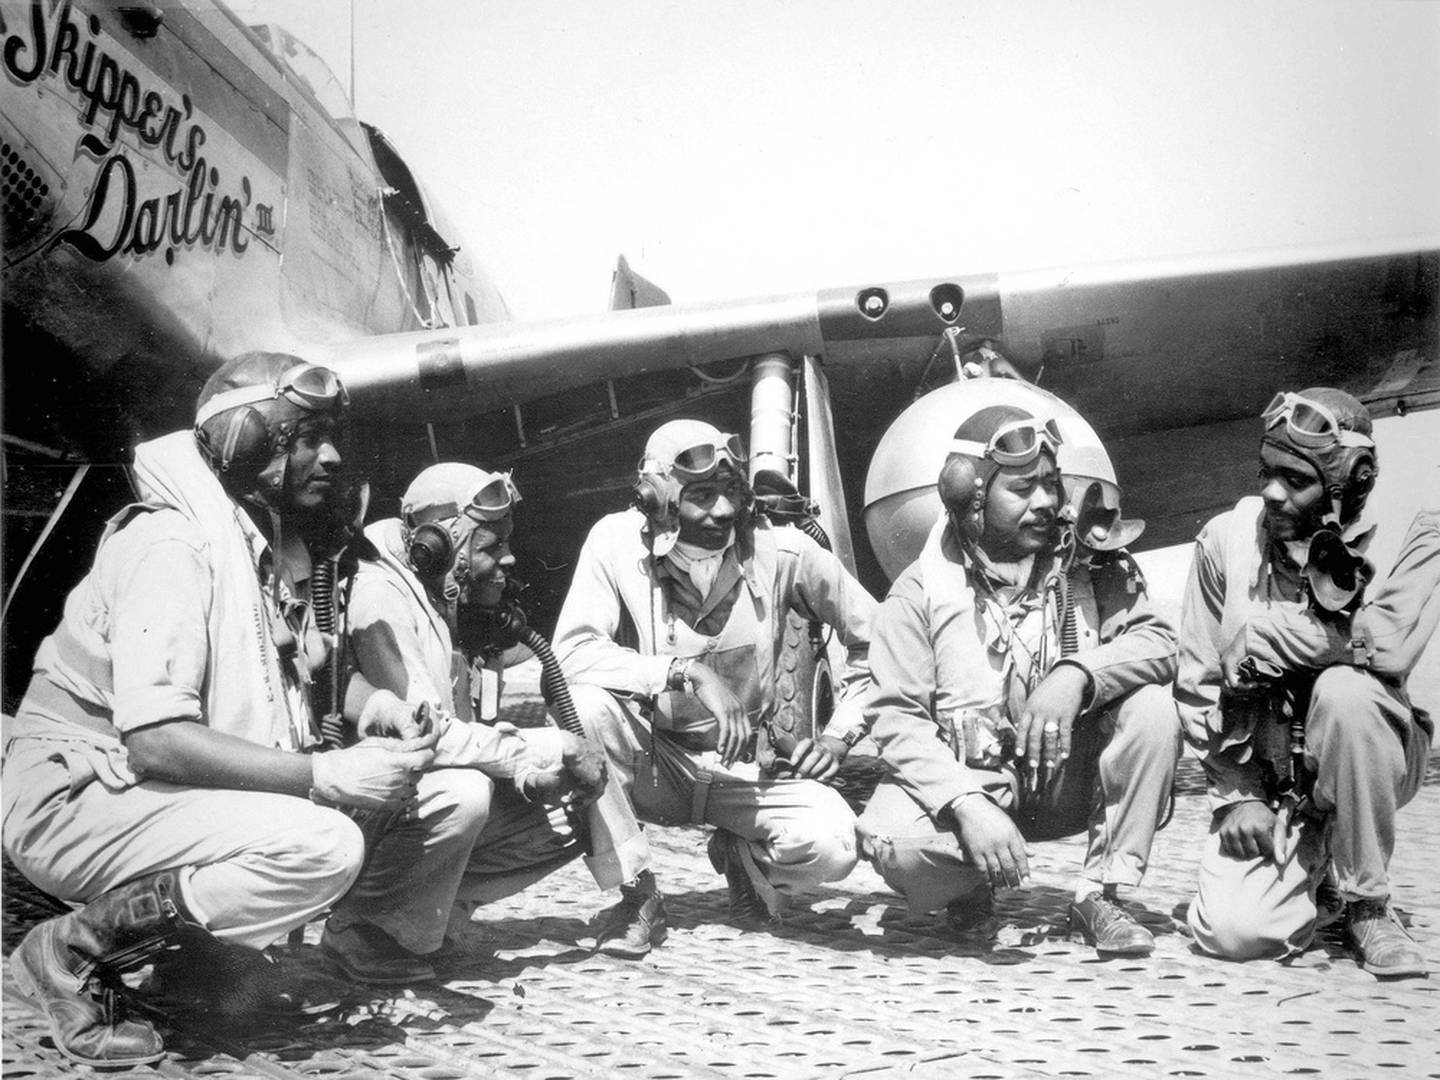 (From left) Lt. Dempsey W. Morgan, Lt. Carrol S. Woods, Lt. Robert H. Nelson Jr., Capt. Andrew D. Turner and Lt. Clarence D. Lester, shown in Ramitelli, Italy, were pilots with the 332nd Fighter Group. The airmen with the elite, all-black fighter group were better known as Tuskegee Airmen. (U.S. Air Force photo)